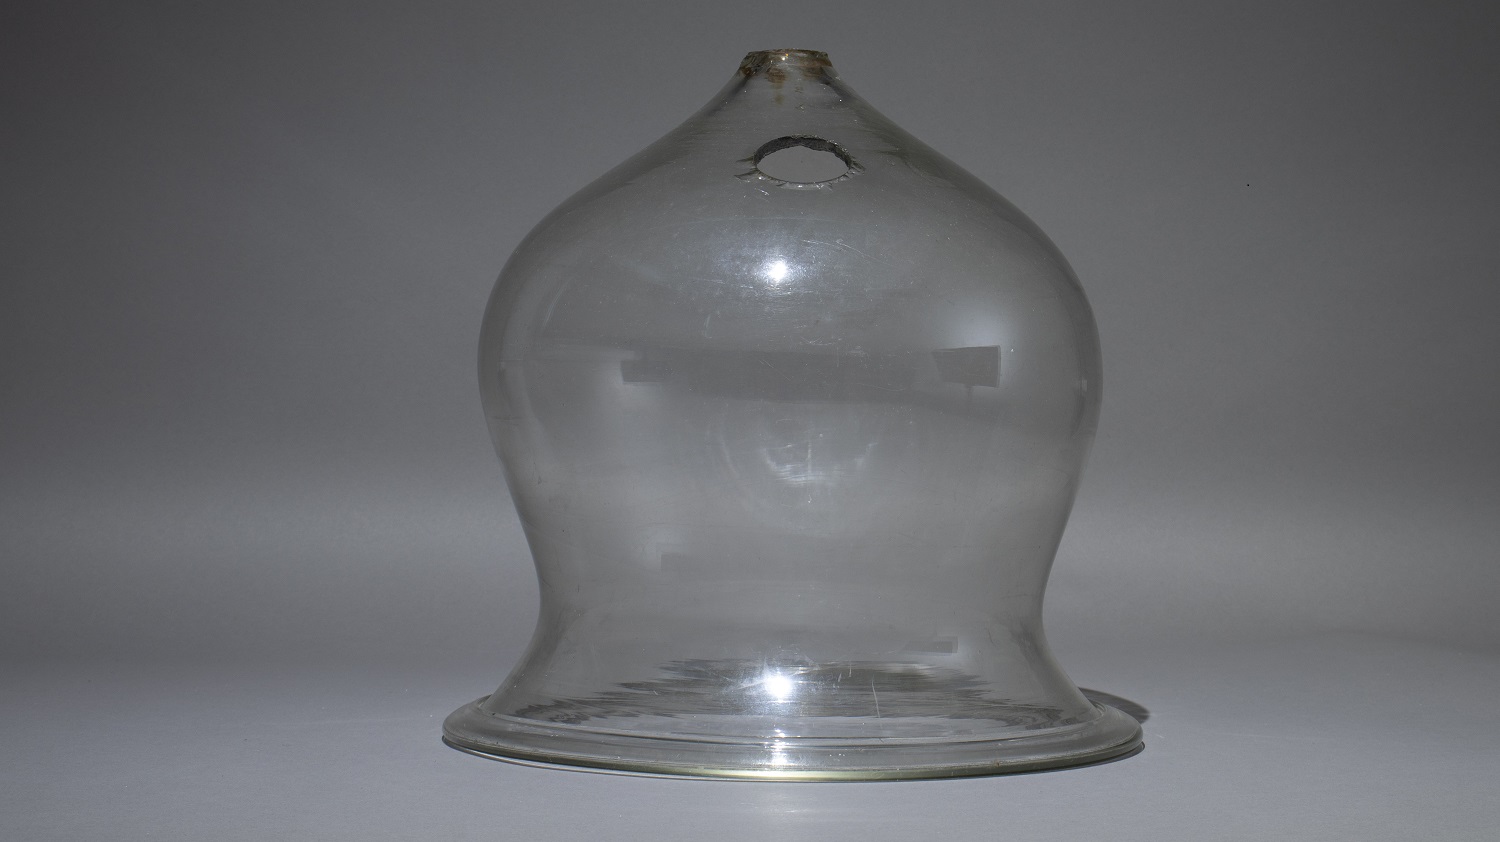 A clear glass globe for fitting over a gas lamp